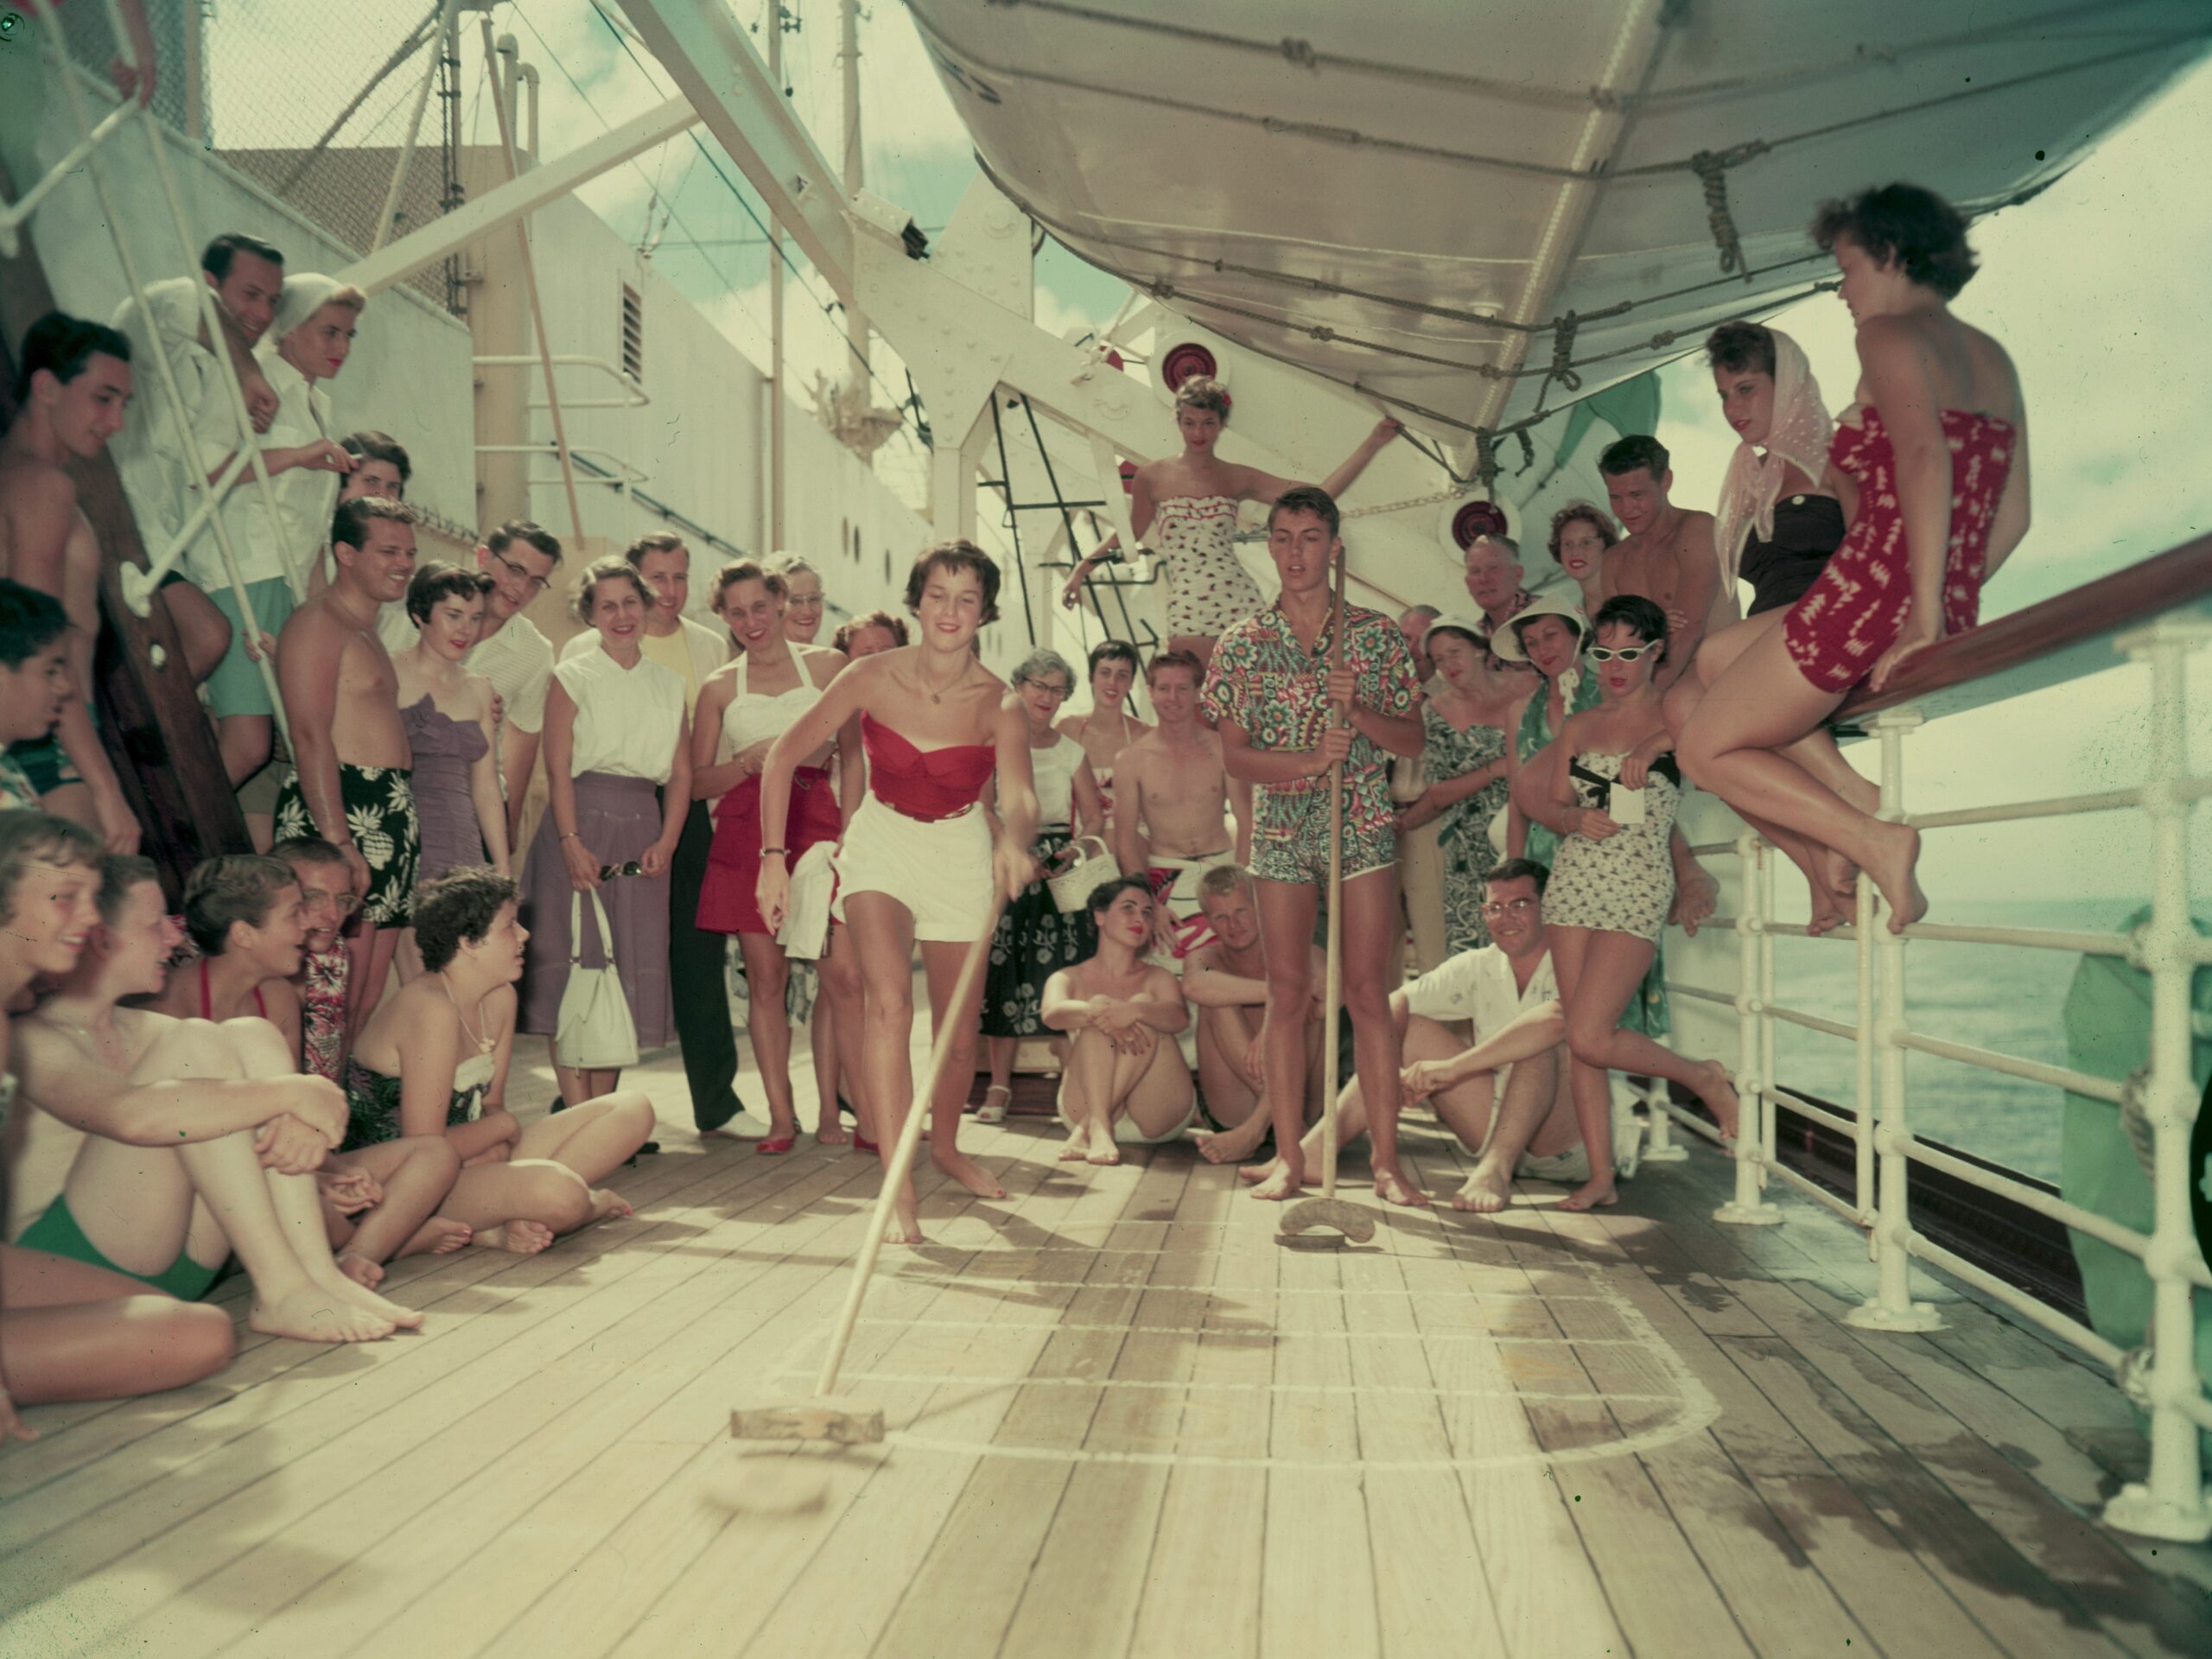 A cruise between San Francisco and Hawaii on the SS Lurline, mid July 1954.